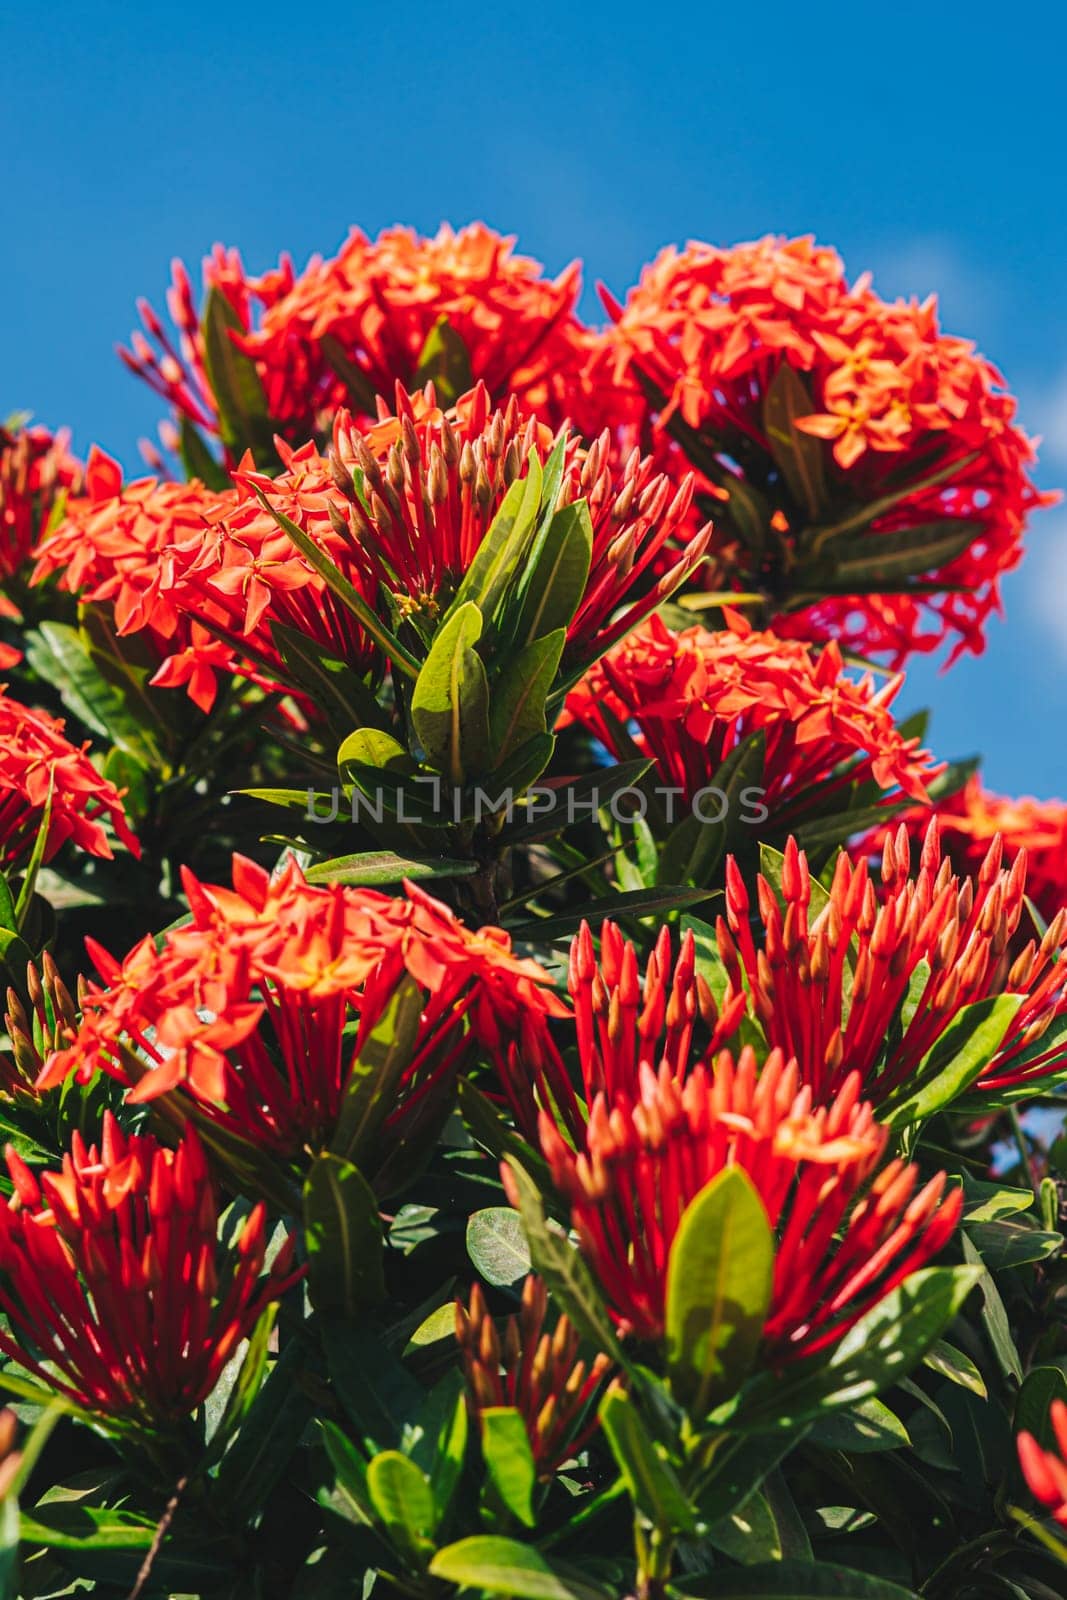 Pohutukawa Delonix regia fiery tree bright red flowers legume family subfamily Caesalpinia blossom blooming against blue sky Vietnam summer day time.